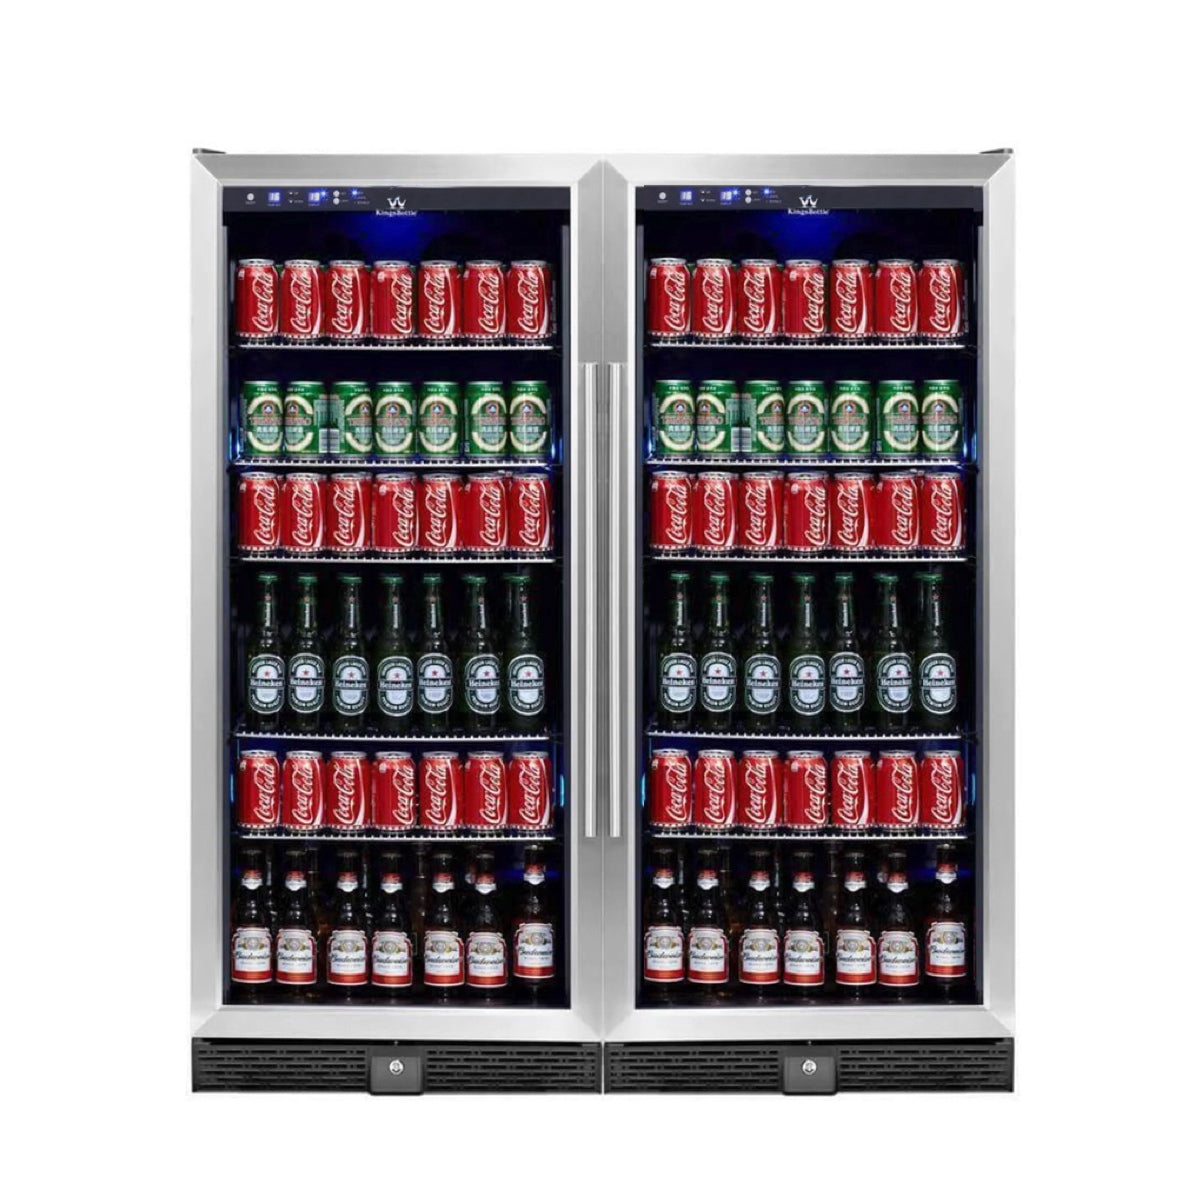 A Kings Bottle 56" Tall Single Zone Beverage Fridge Center with a glass door filled with beer bottles and cans.